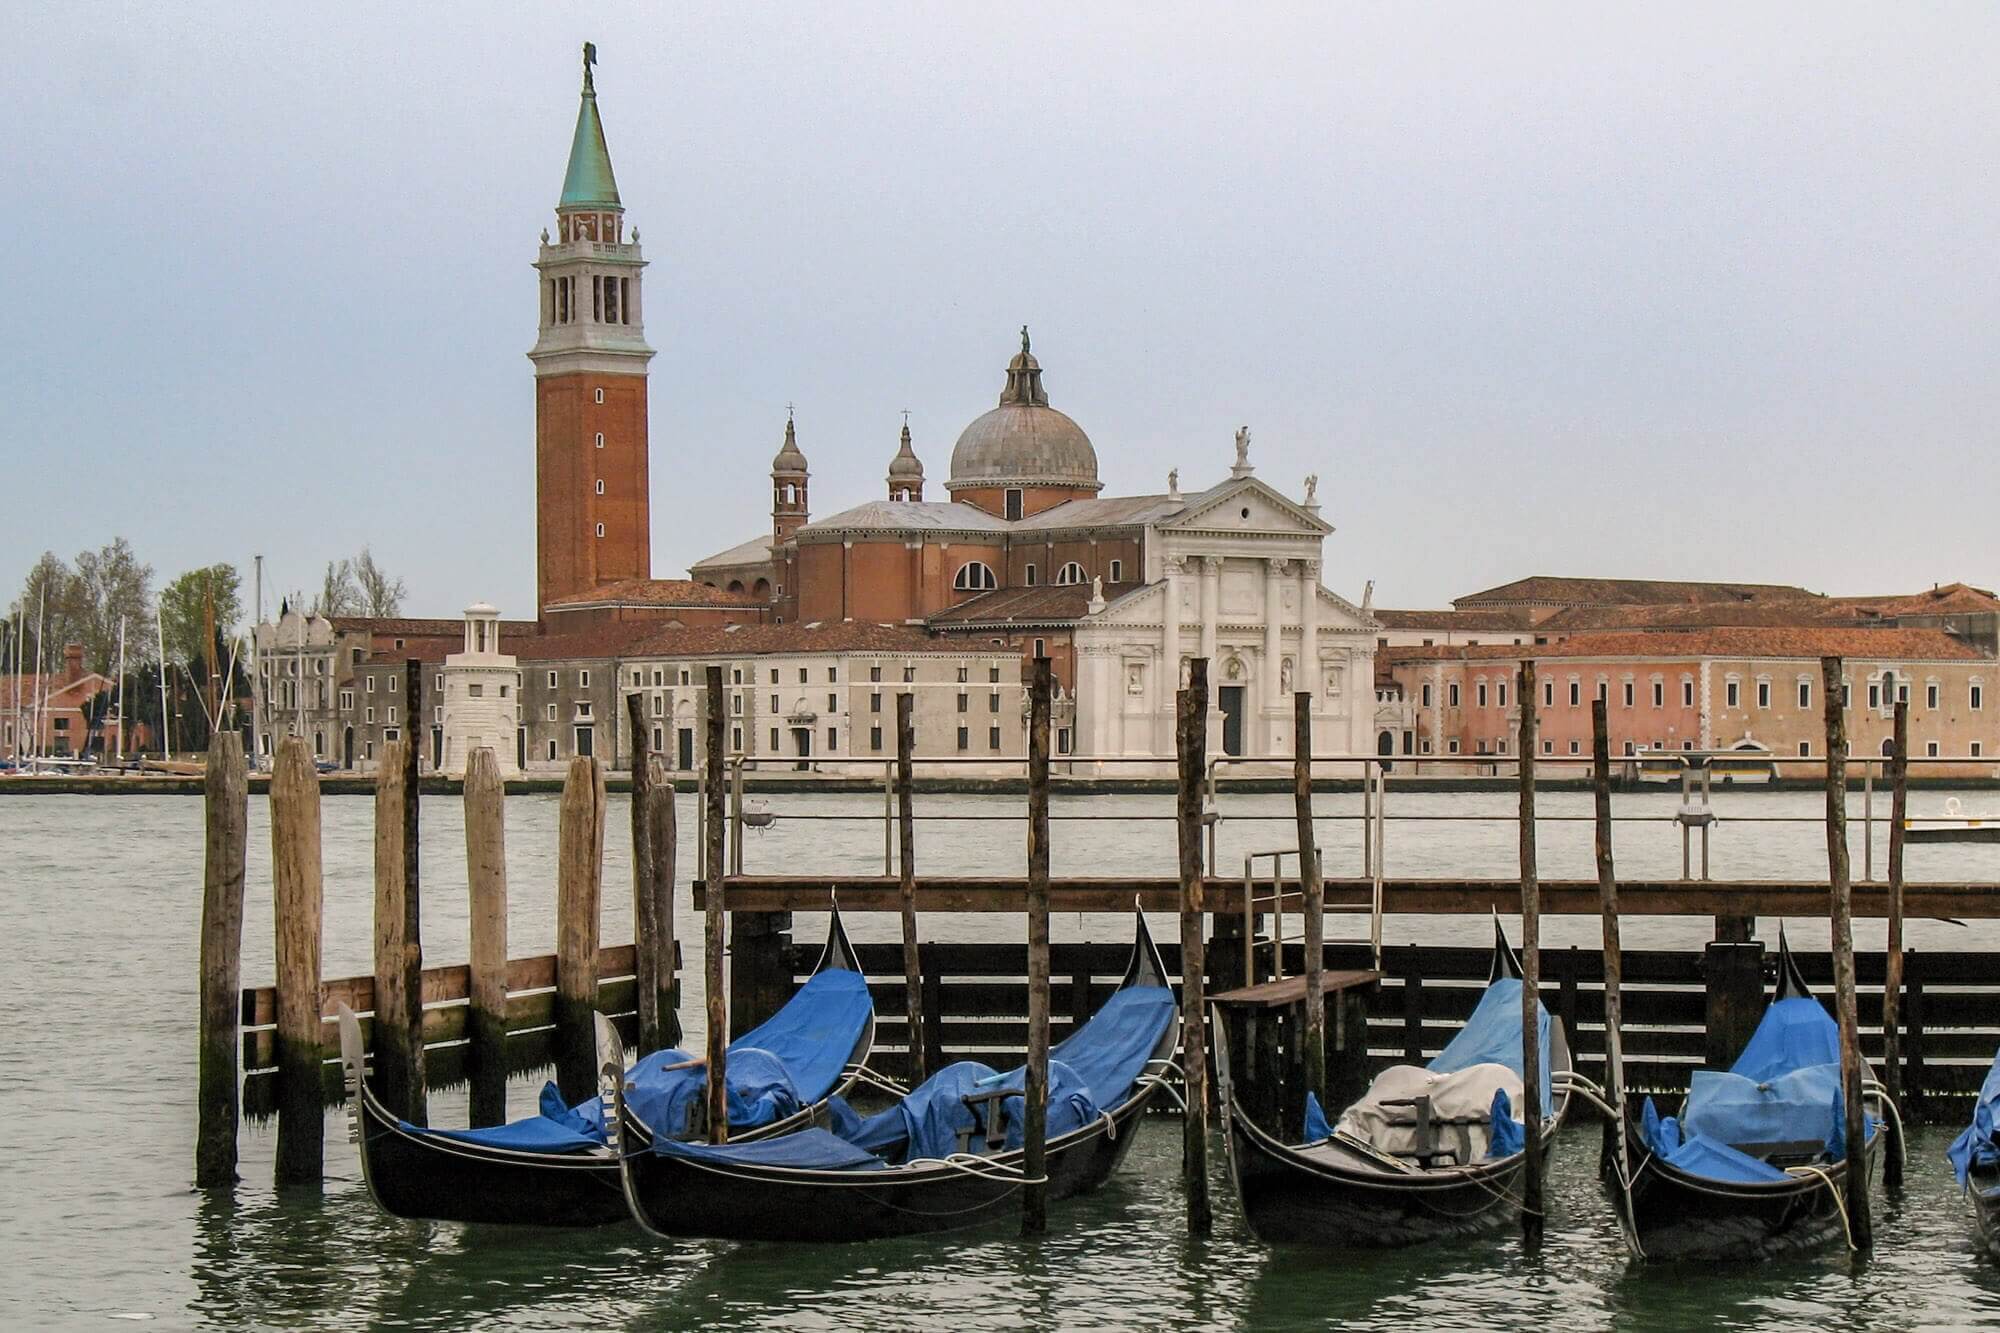 Looking across the channel at San Giorgio Maggiore with Venetian gondolas in the foreground